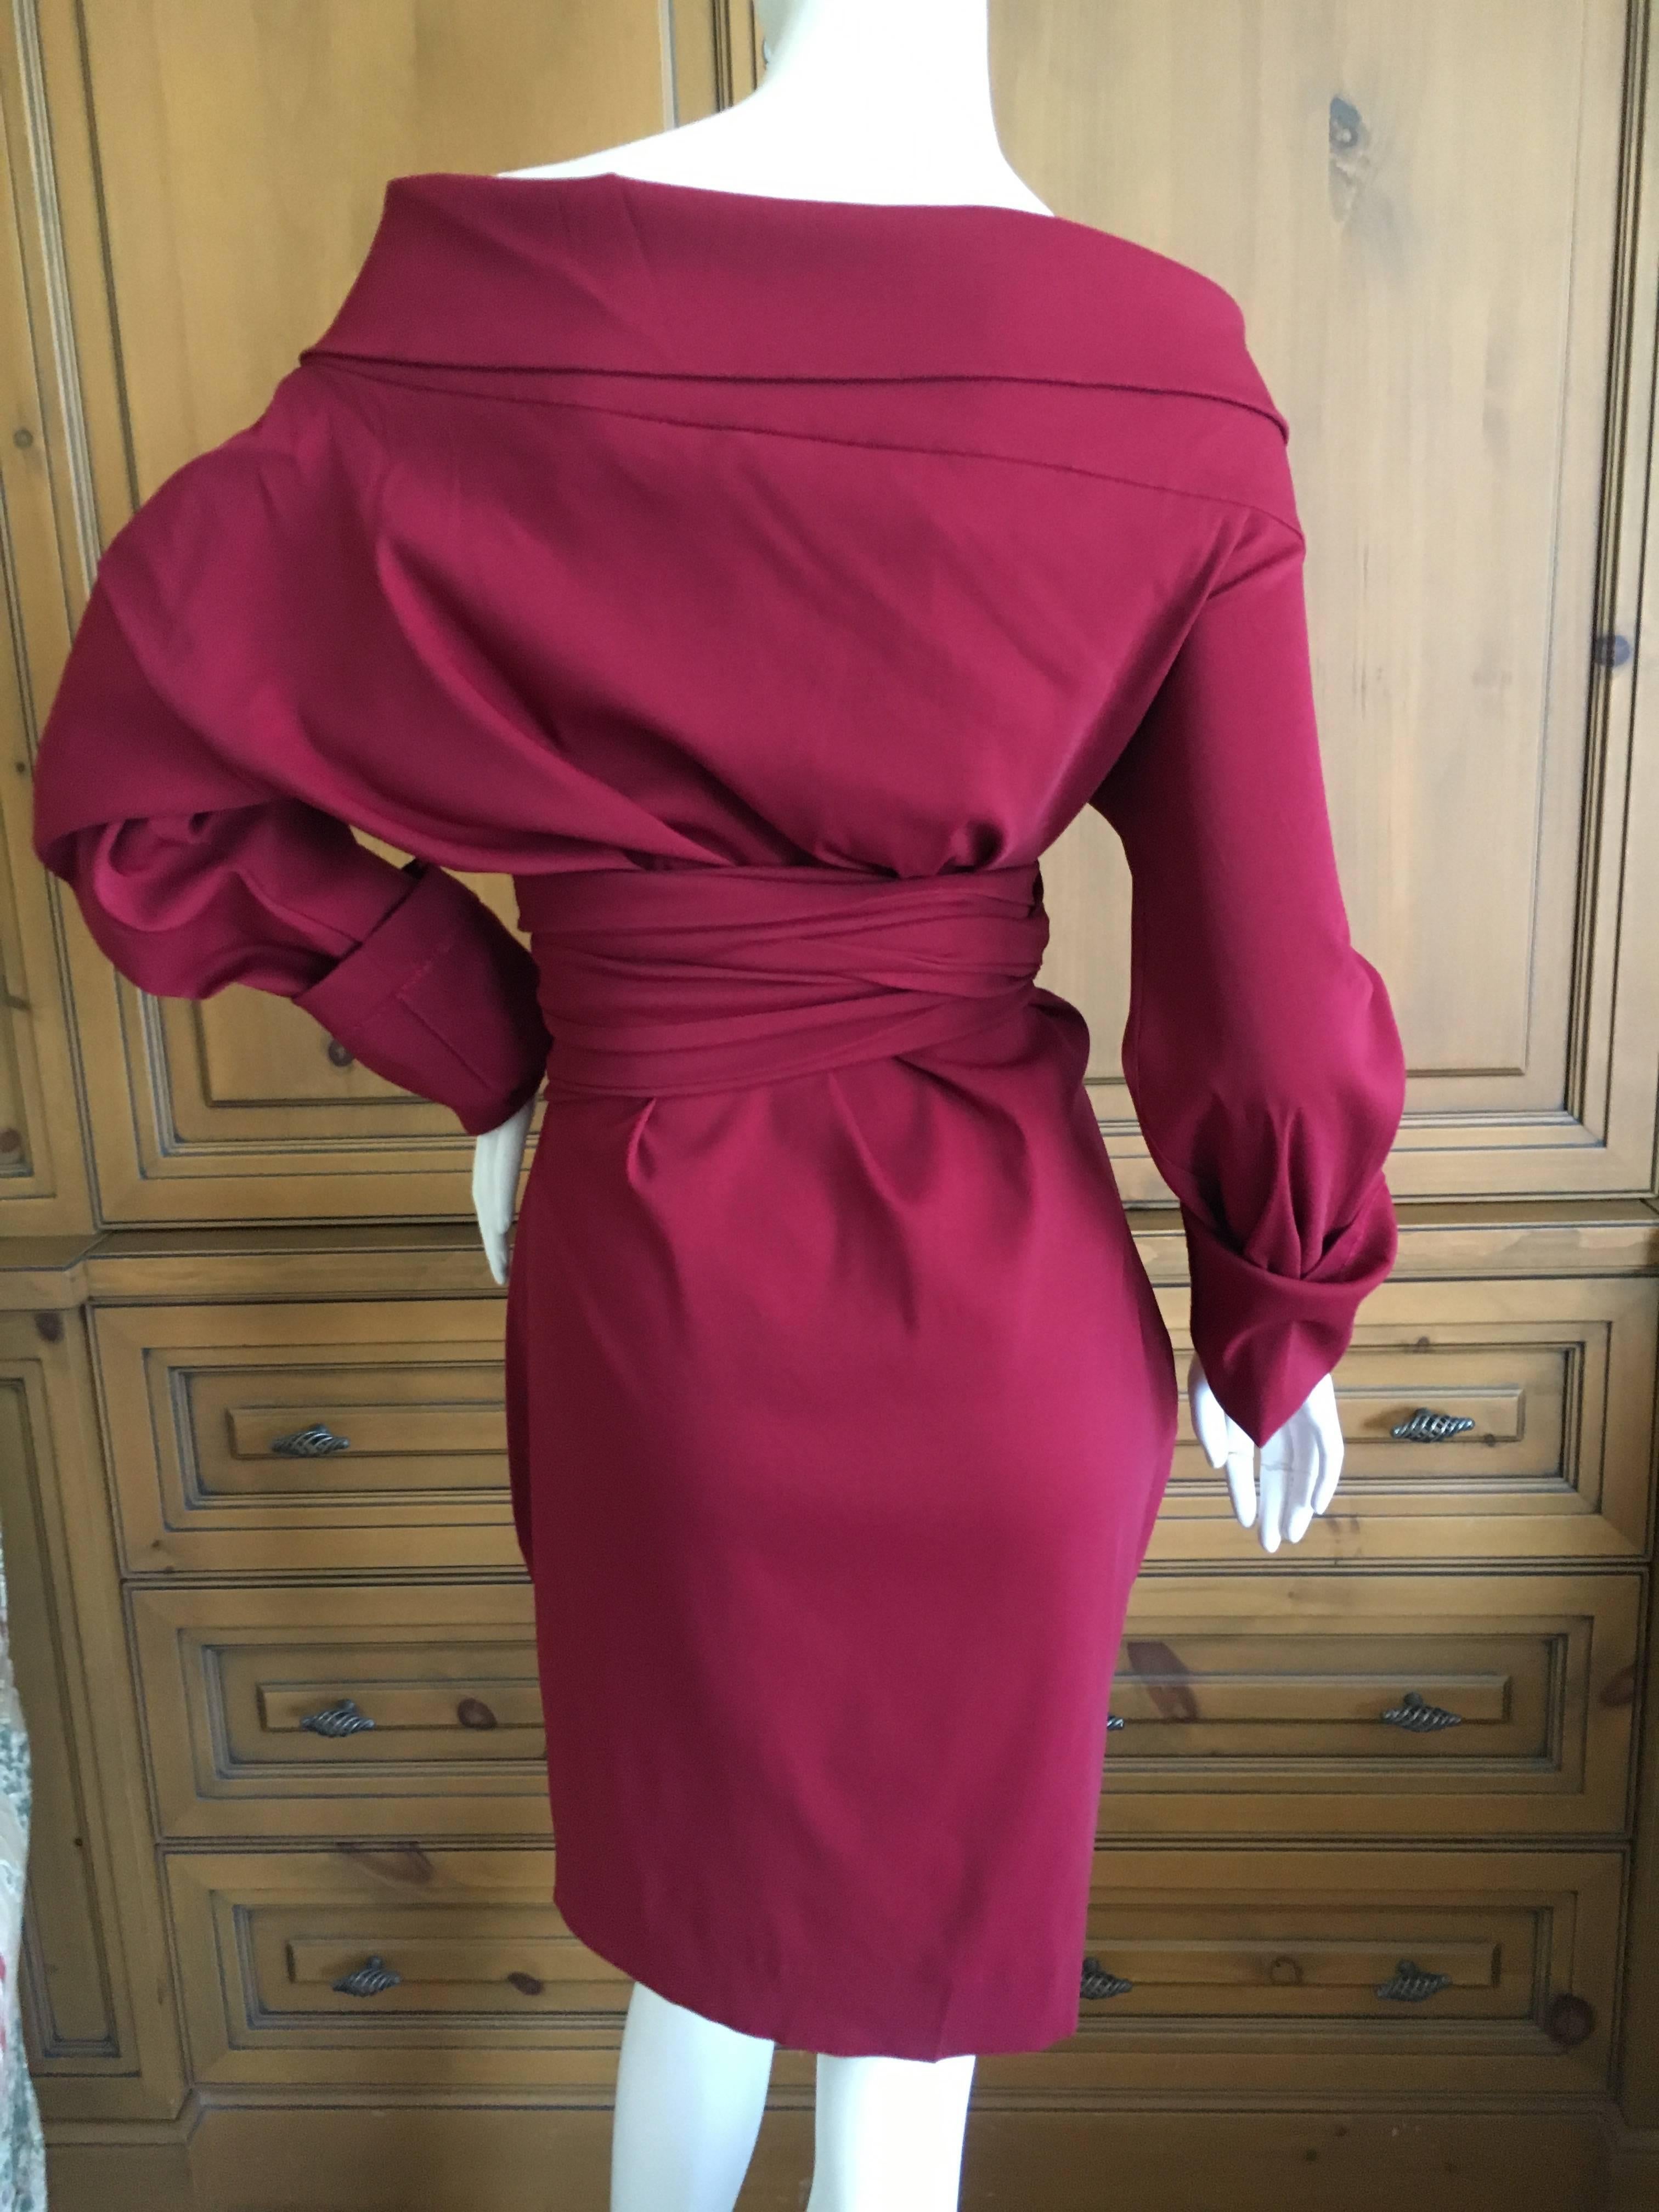 Romeo Gigli for Bergdorf Goodman Revealing Red Wrap Dress In Excellent Condition For Sale In Cloverdale, CA